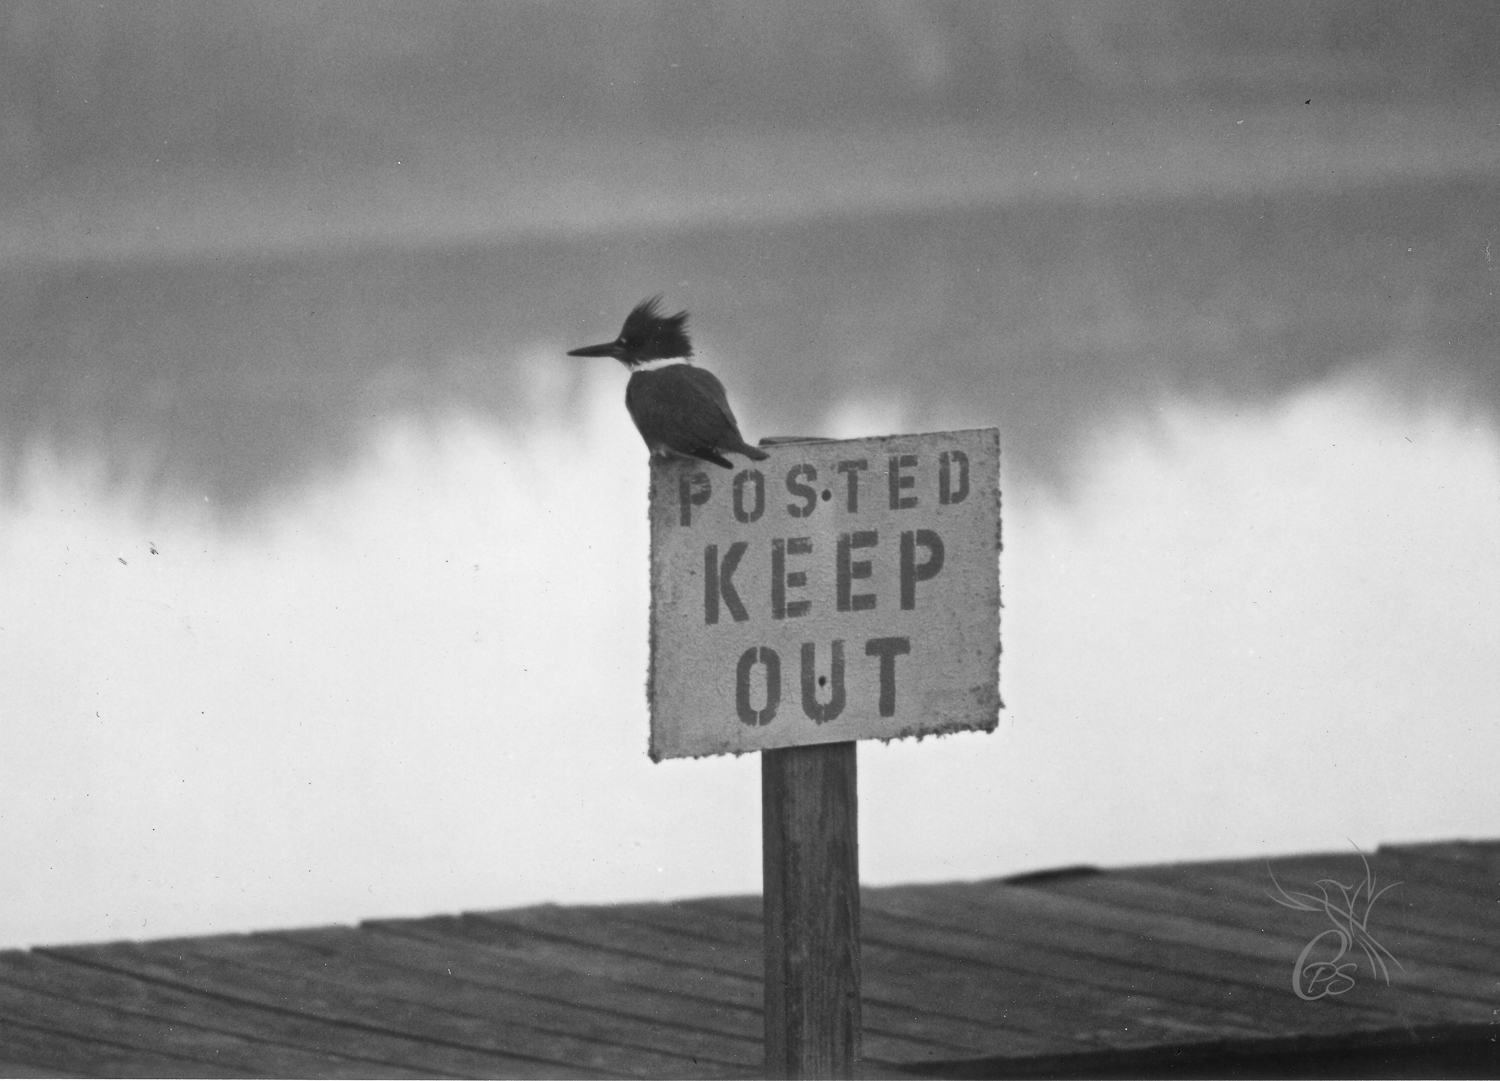 "Keep Out" Kingfisher